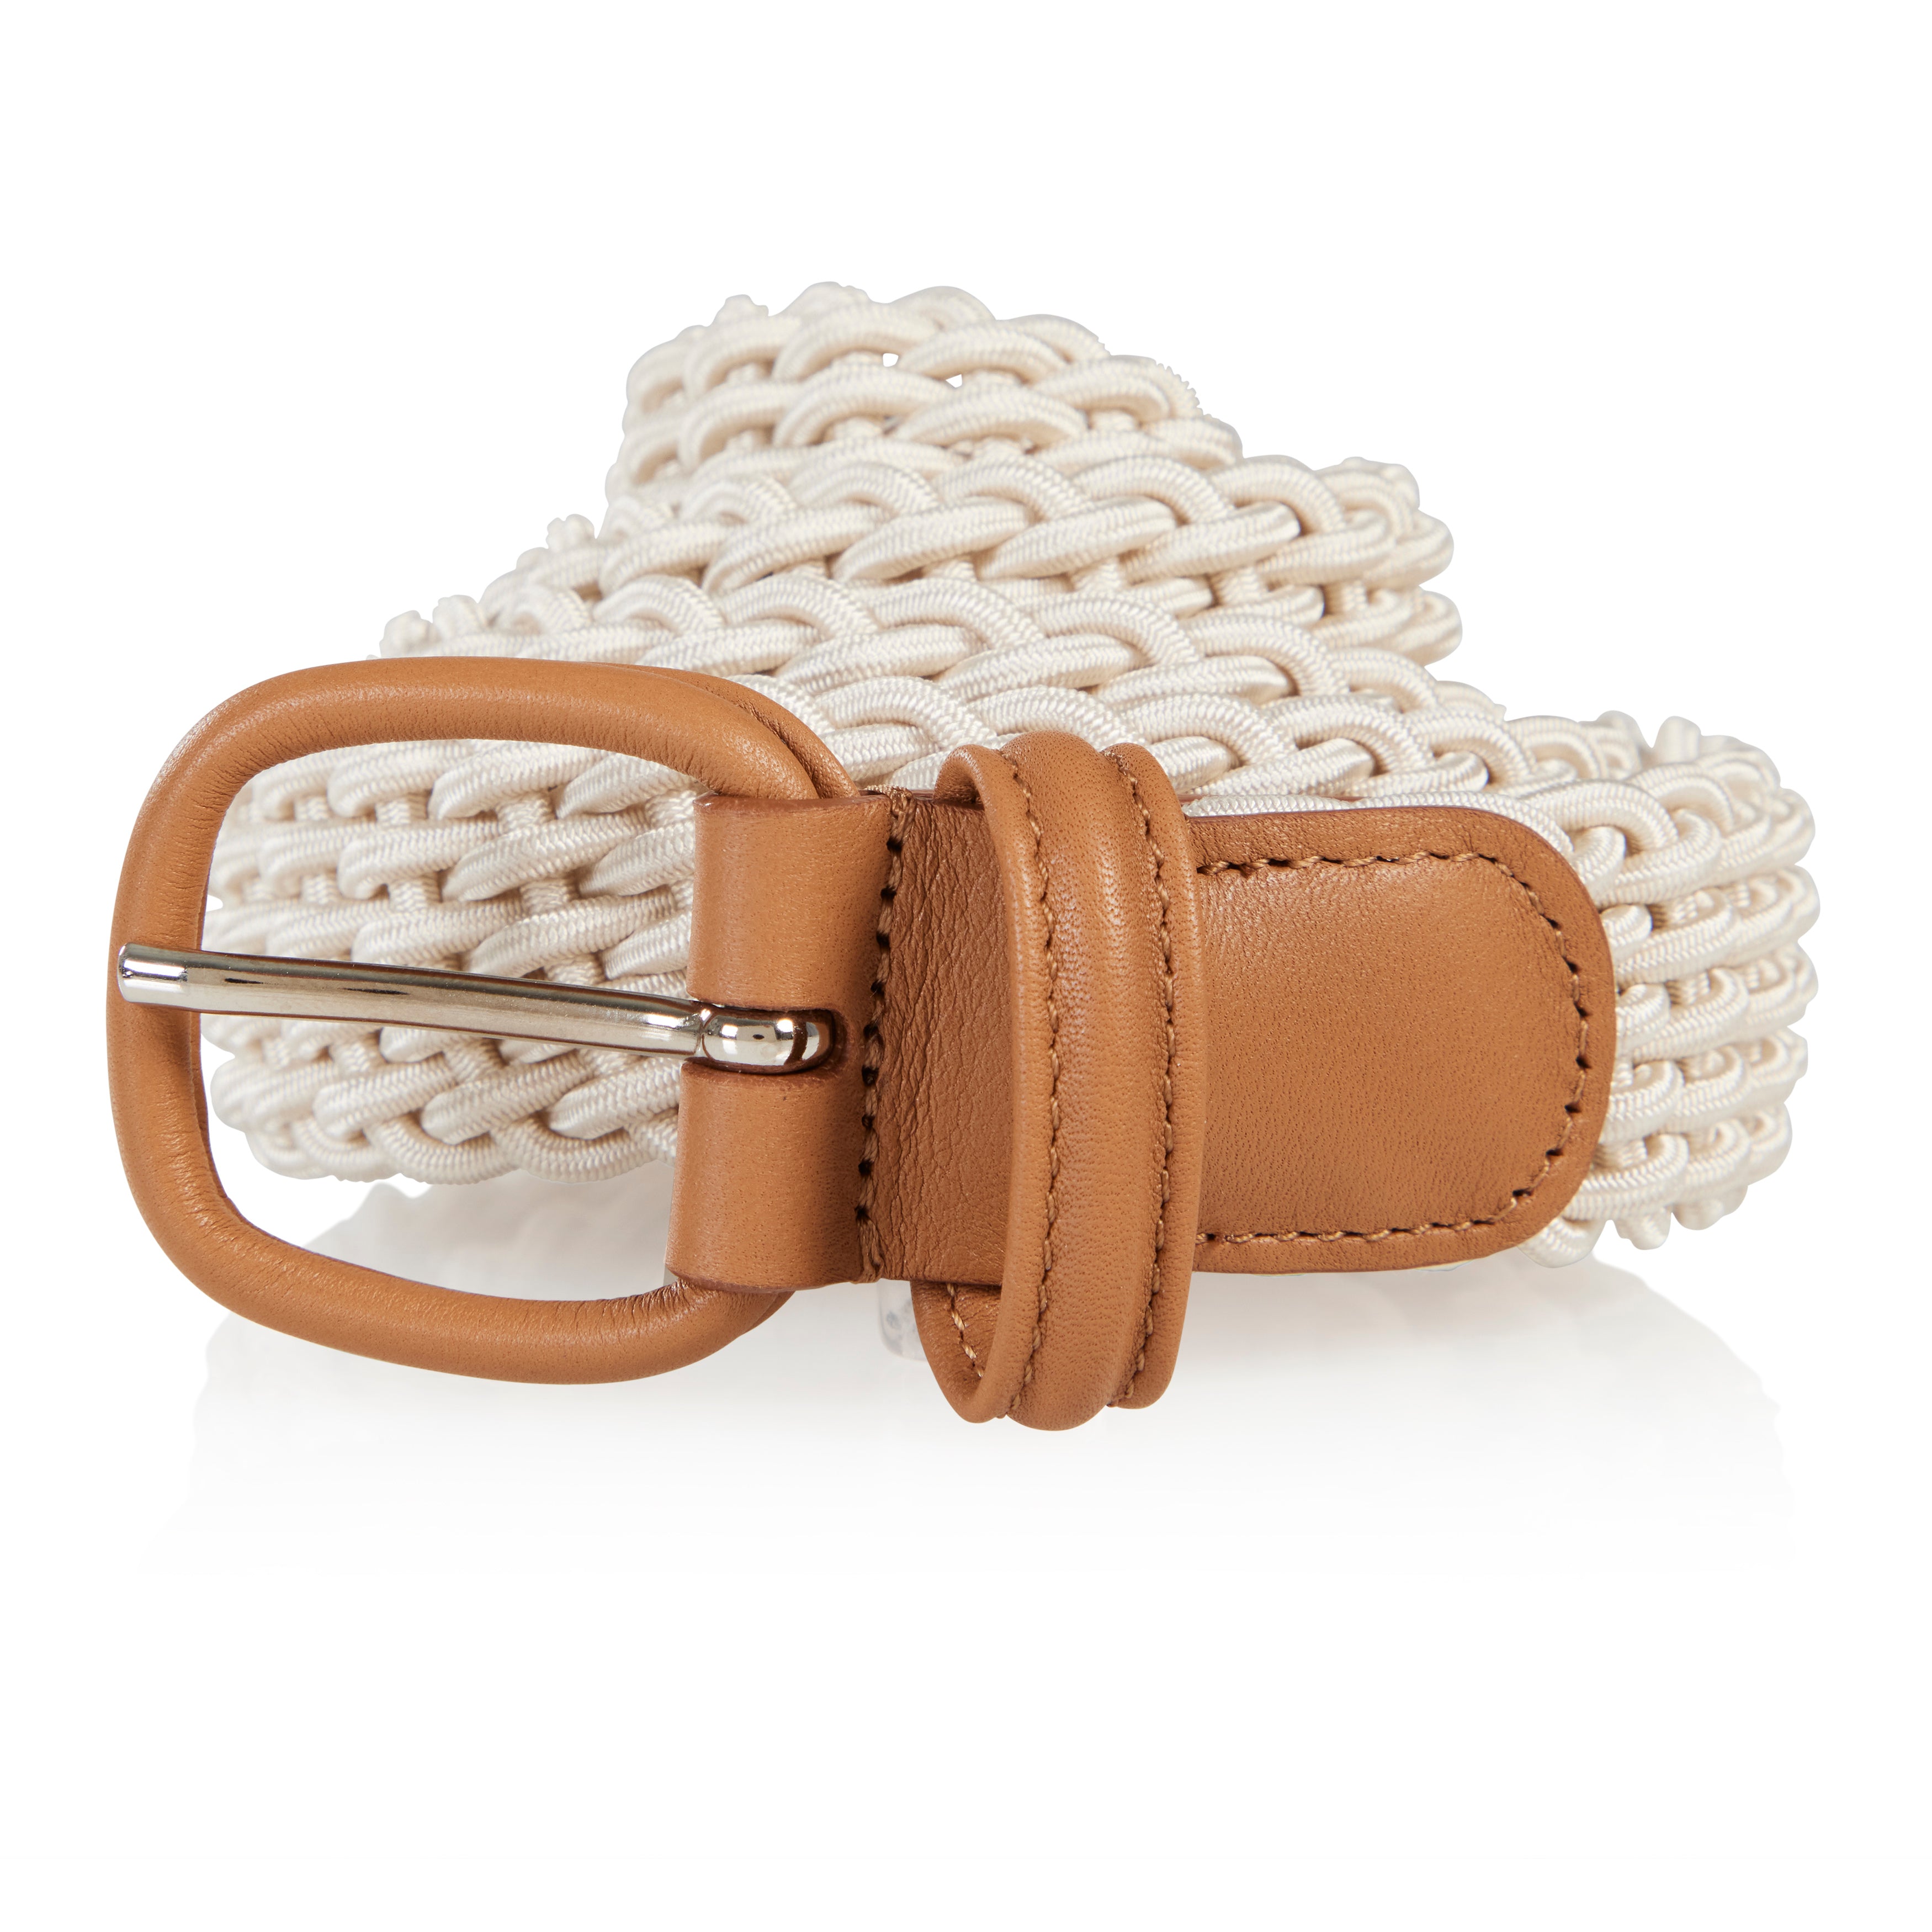 Brown Woven elasticated leather belt, Anderson's